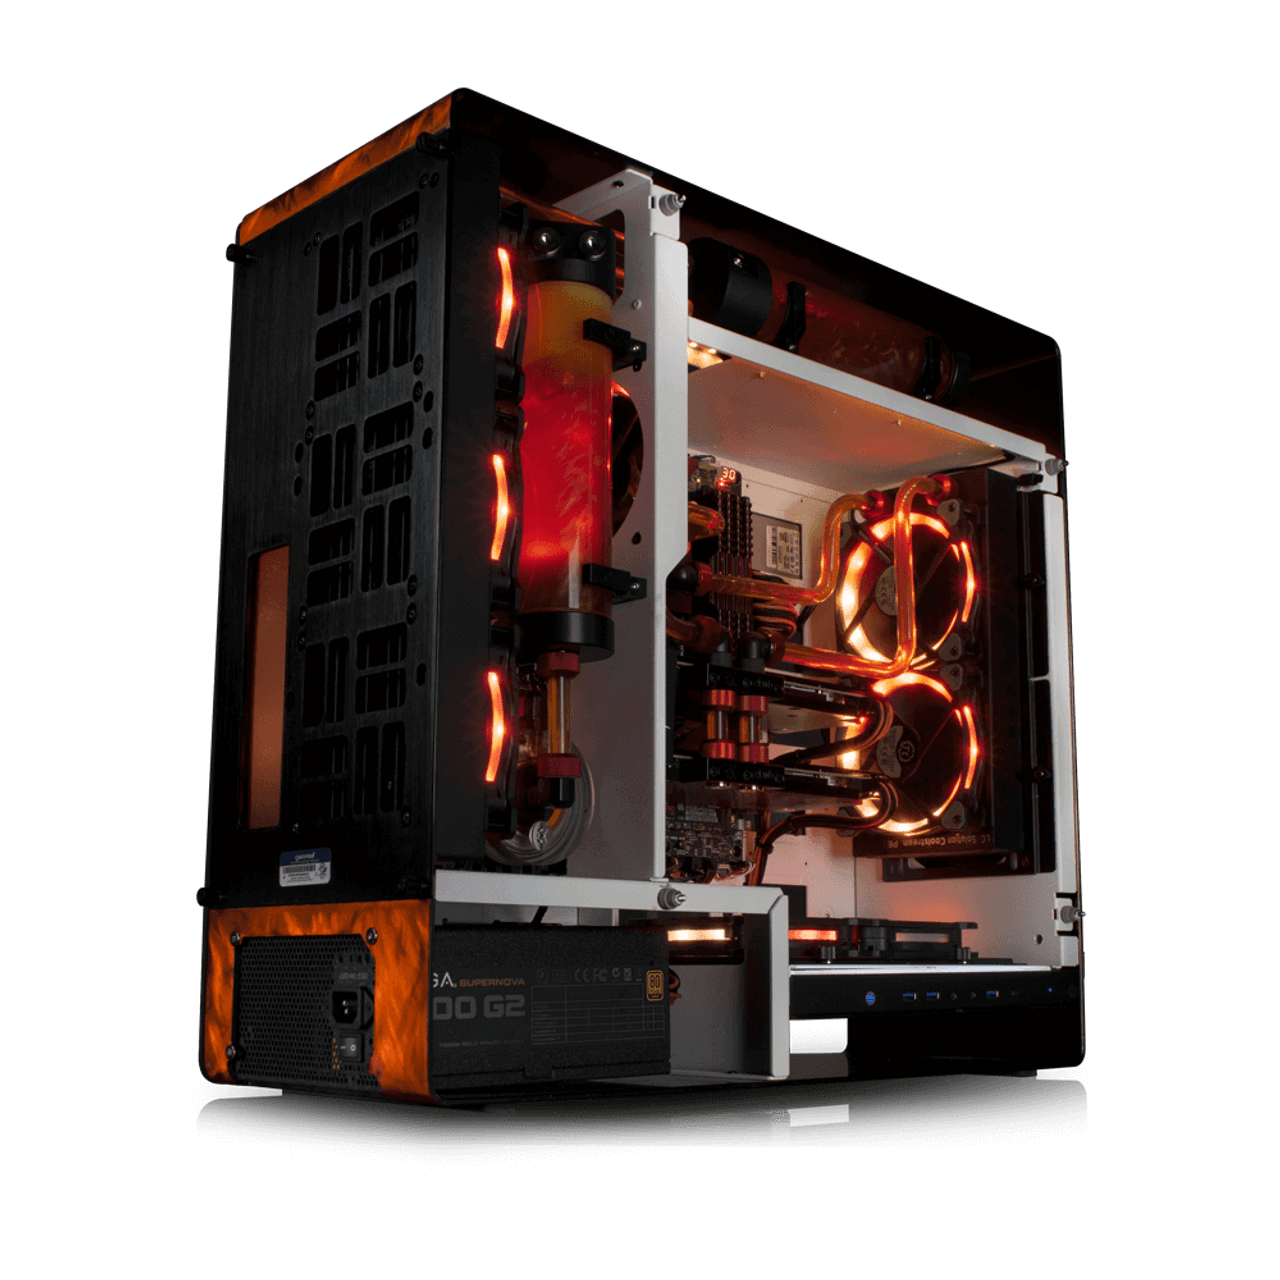 Custome Configured System/ Core i5 9600K 3.70GHz C6 1151 RET WOF/ 240mm Liquid Cooler for CPUs(2x RGB fans on Cooler)/ Intel Z390 Chipset Motherboard/ (2x) 8GB DDR4 3200 PC4-25600 TridentZ RGB X/ 1TB 970 EVO Plus NVMe M.2 SSD